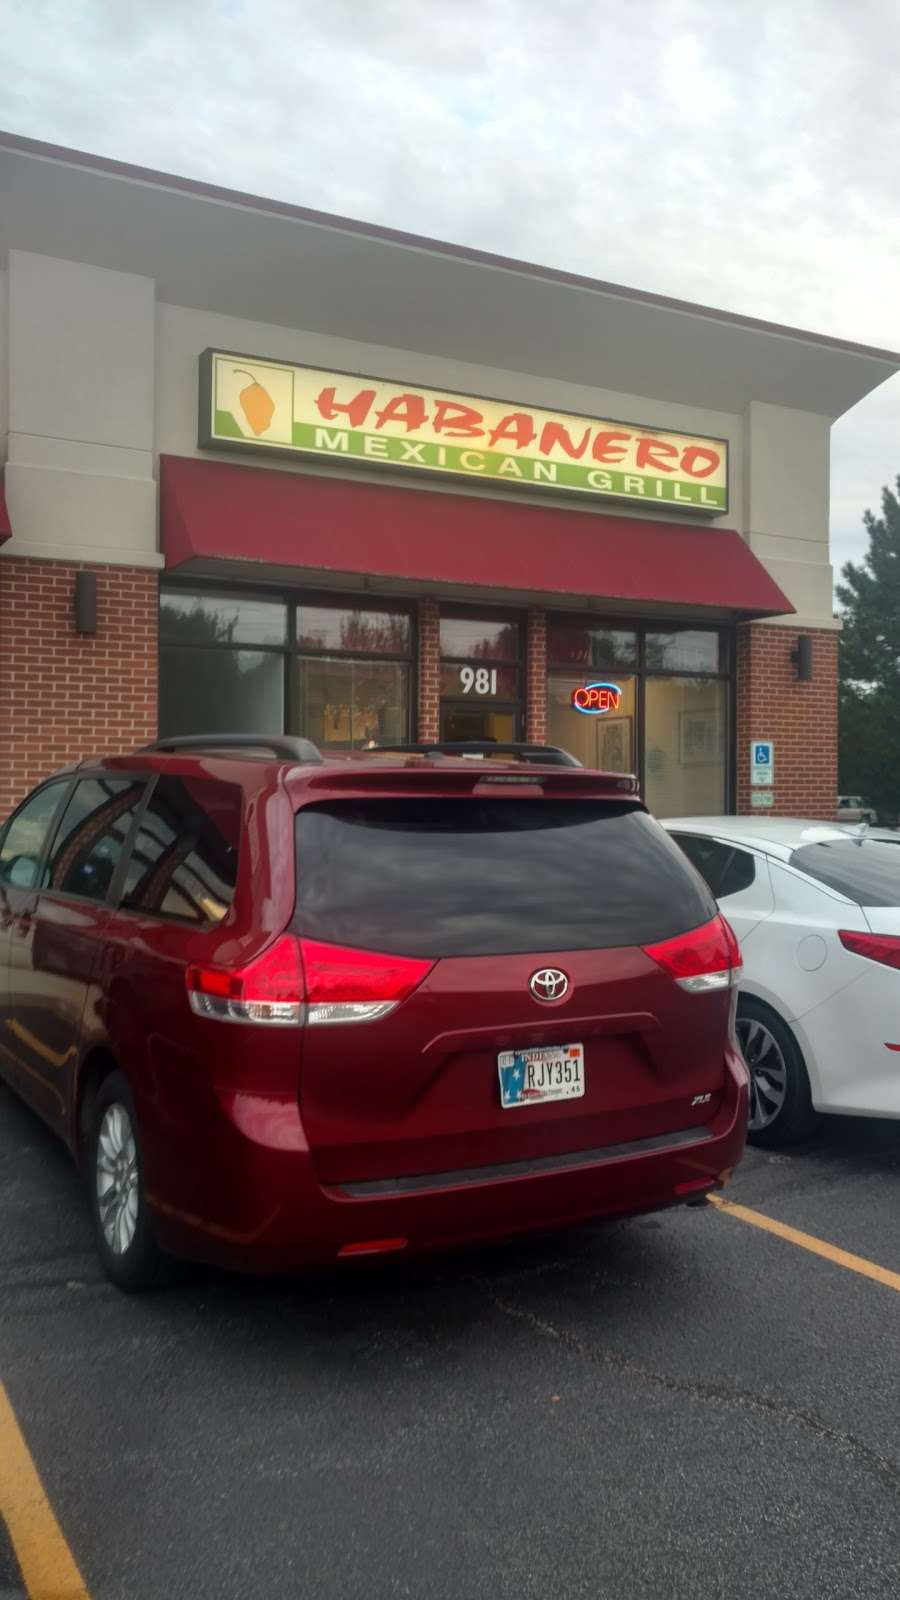 Habanero Mexican Grill | 981 Dixie Hwy, Beecher, IL 60401 | Phone: (708) 946-6660